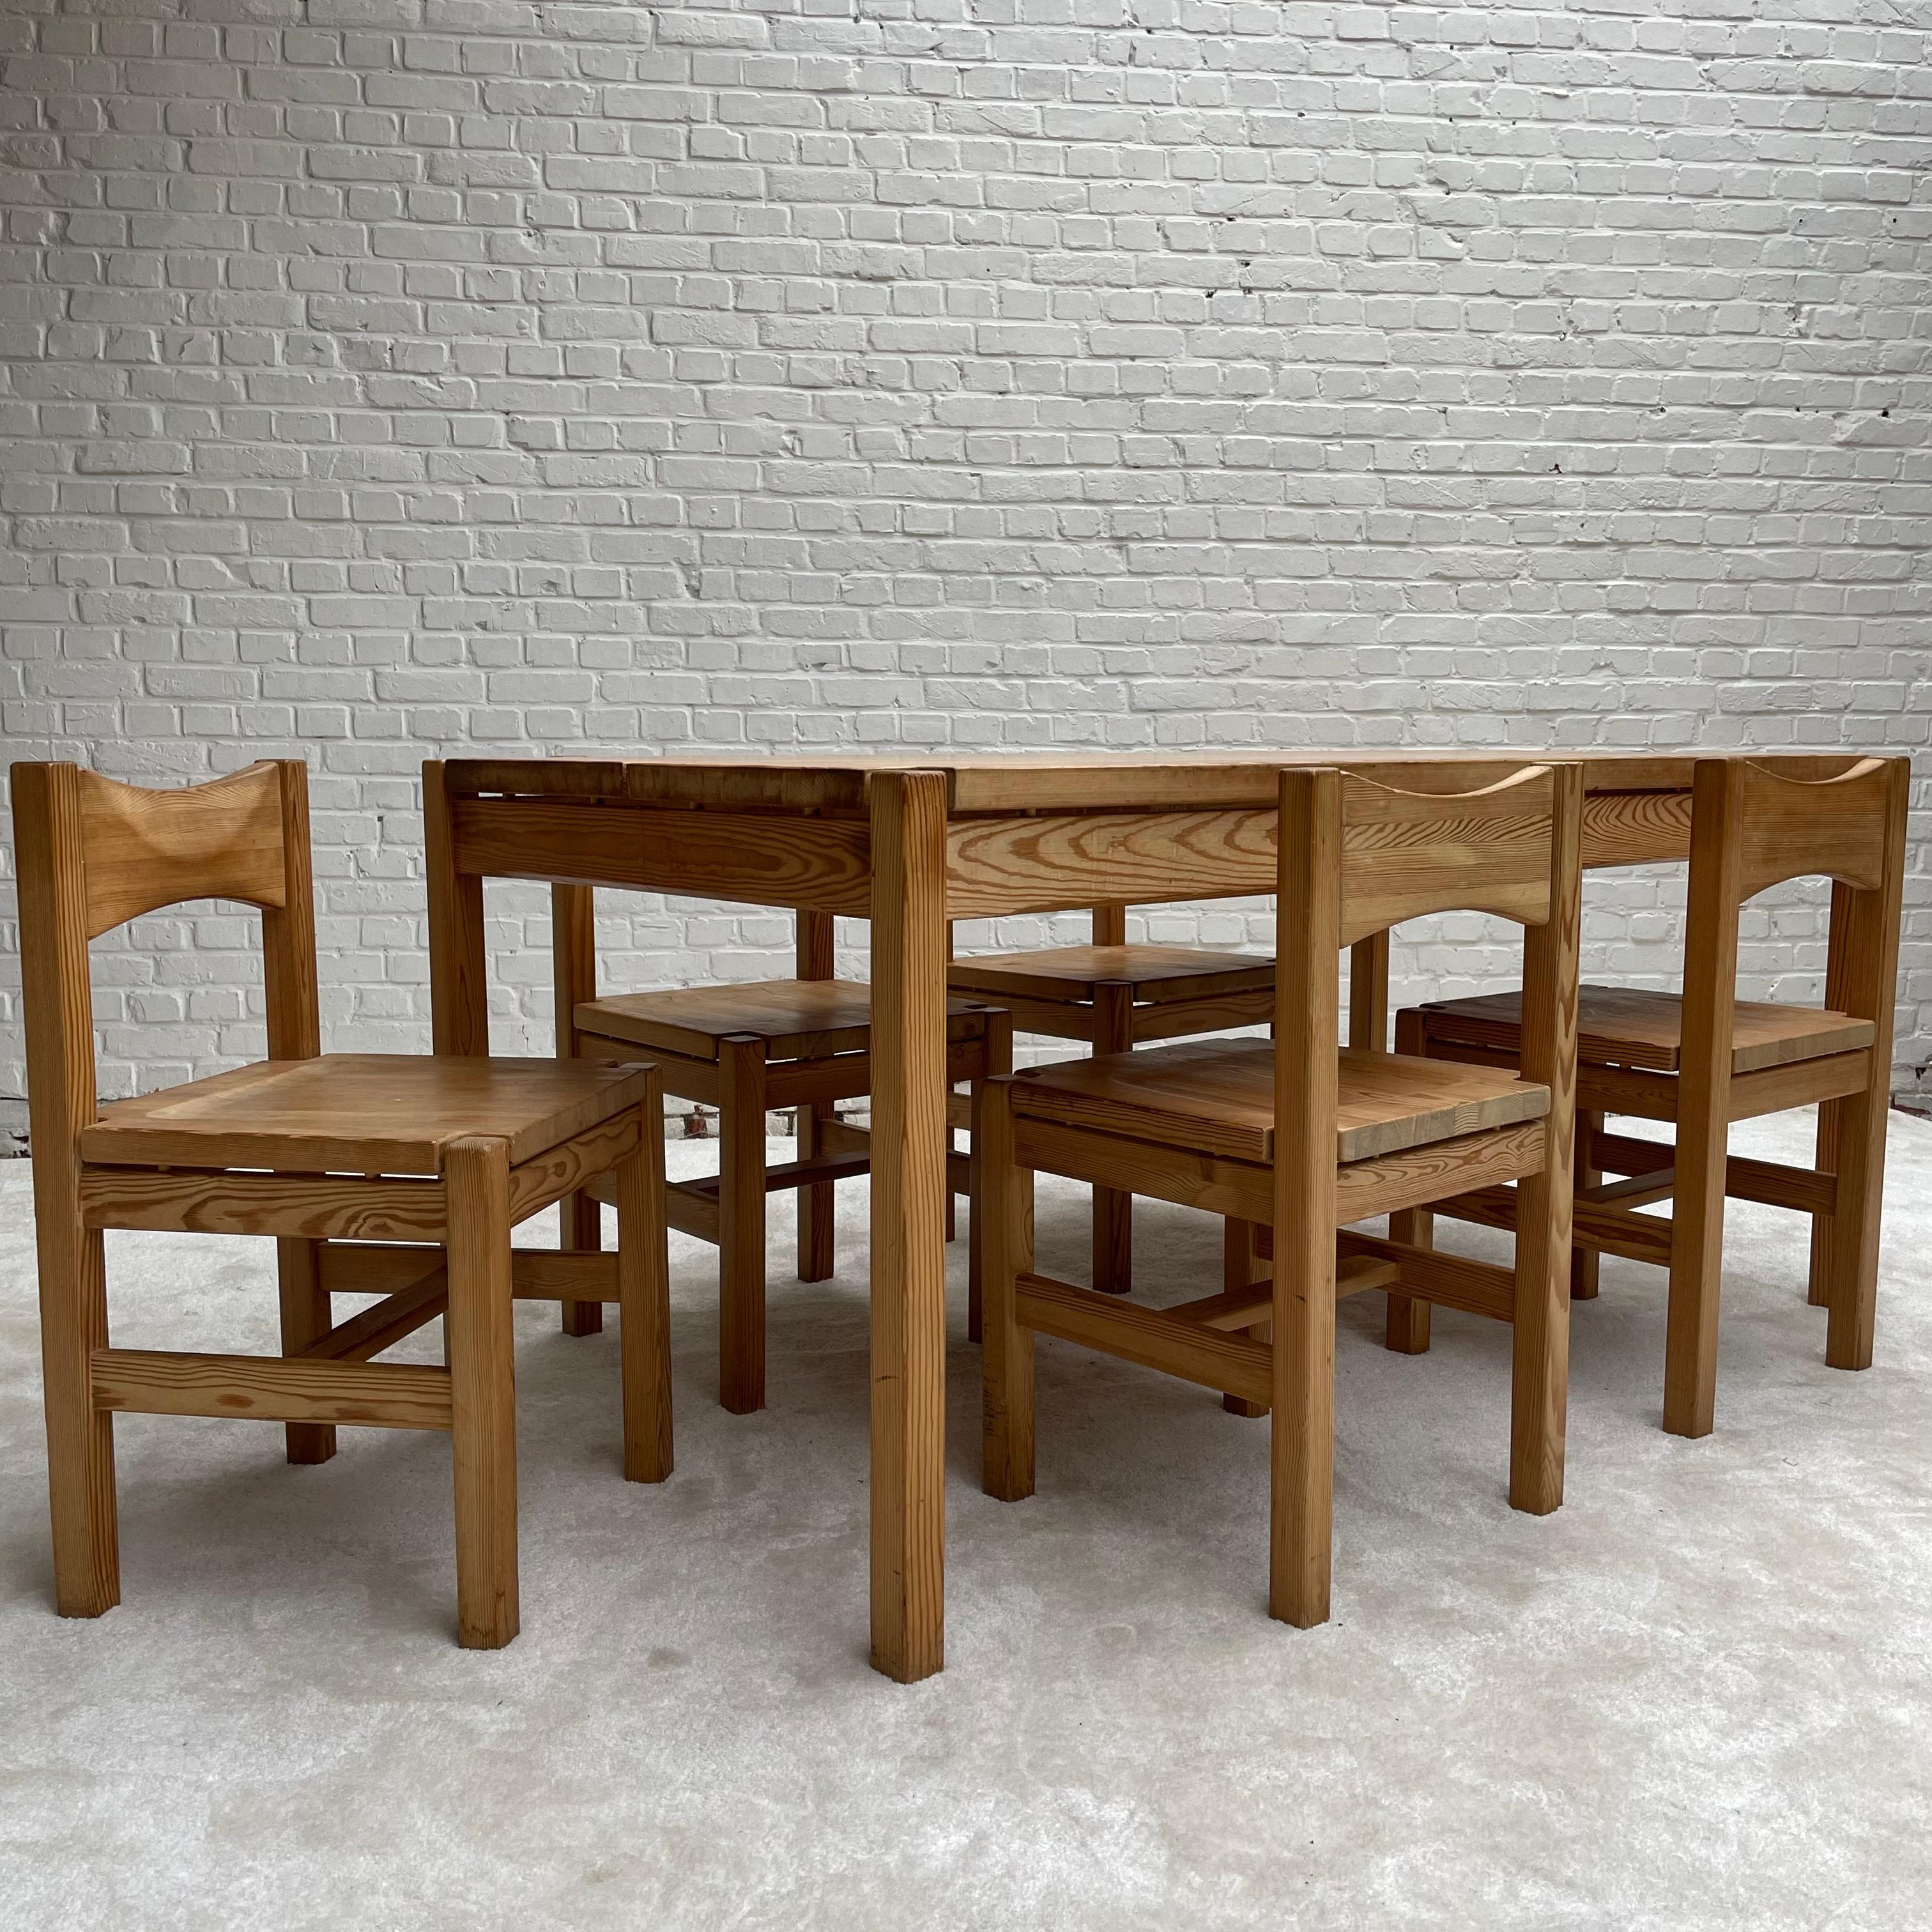 Dining set by Ilmar Tapiovaara for Laukaan Puu Finnland 
It contains 5 chairs and dining table 

Dimensions: 
Table – H 72 x W 120 x D 80 cm 
Chairs – H 72 x W 40 x D 40 x SH 42

The whole set is in very good conditions. Lightly used, with